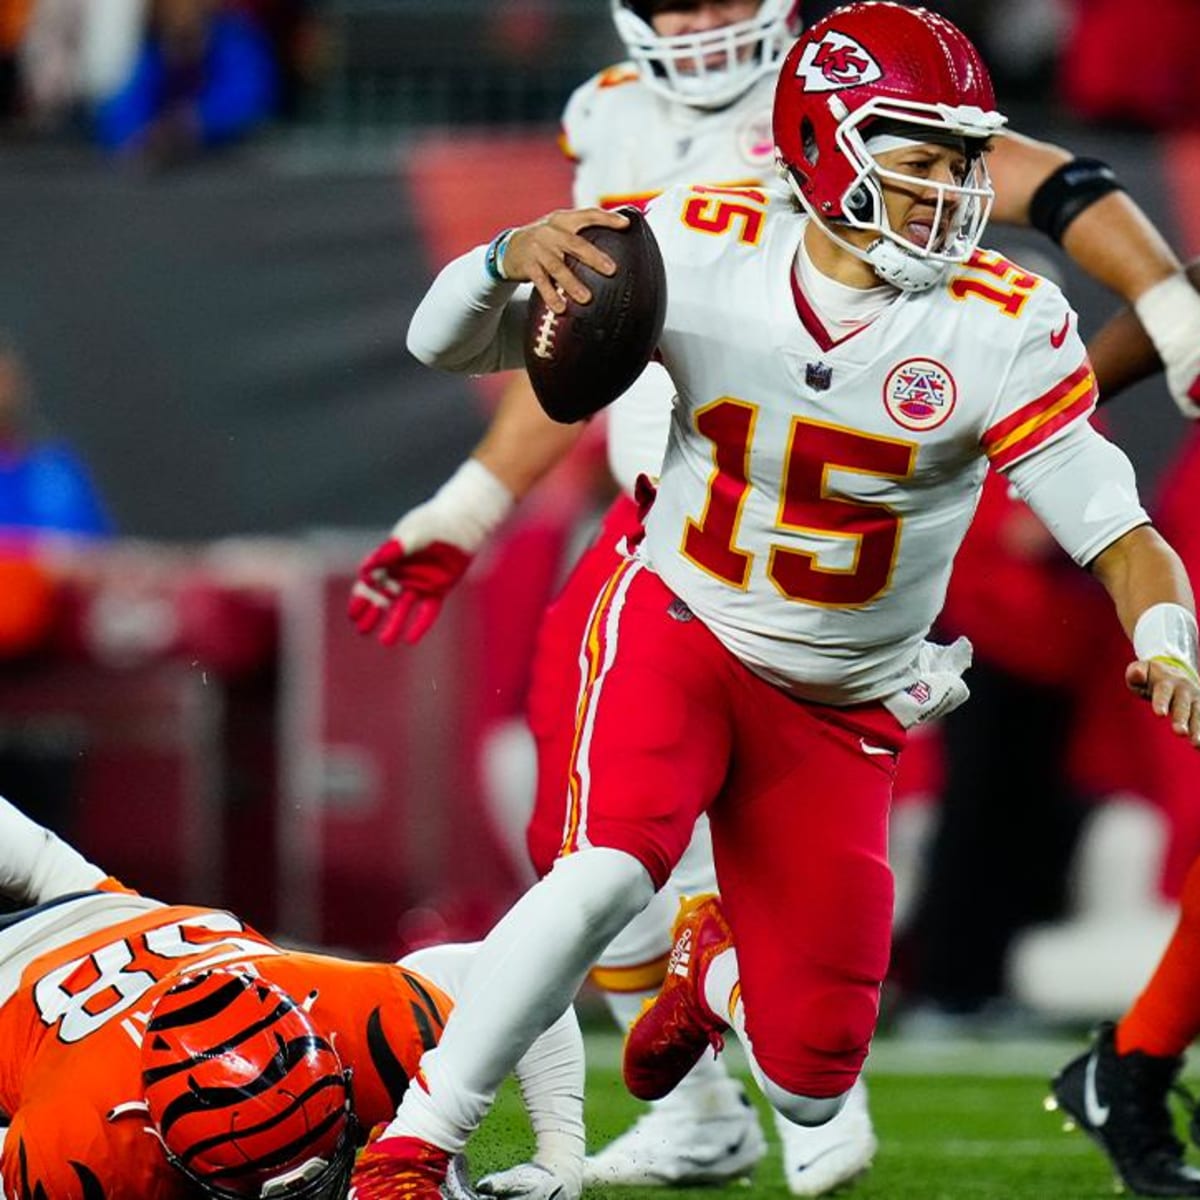 Bengals vs Chiefs odds for AFC Championship Game 2022 - Cincy Jungle